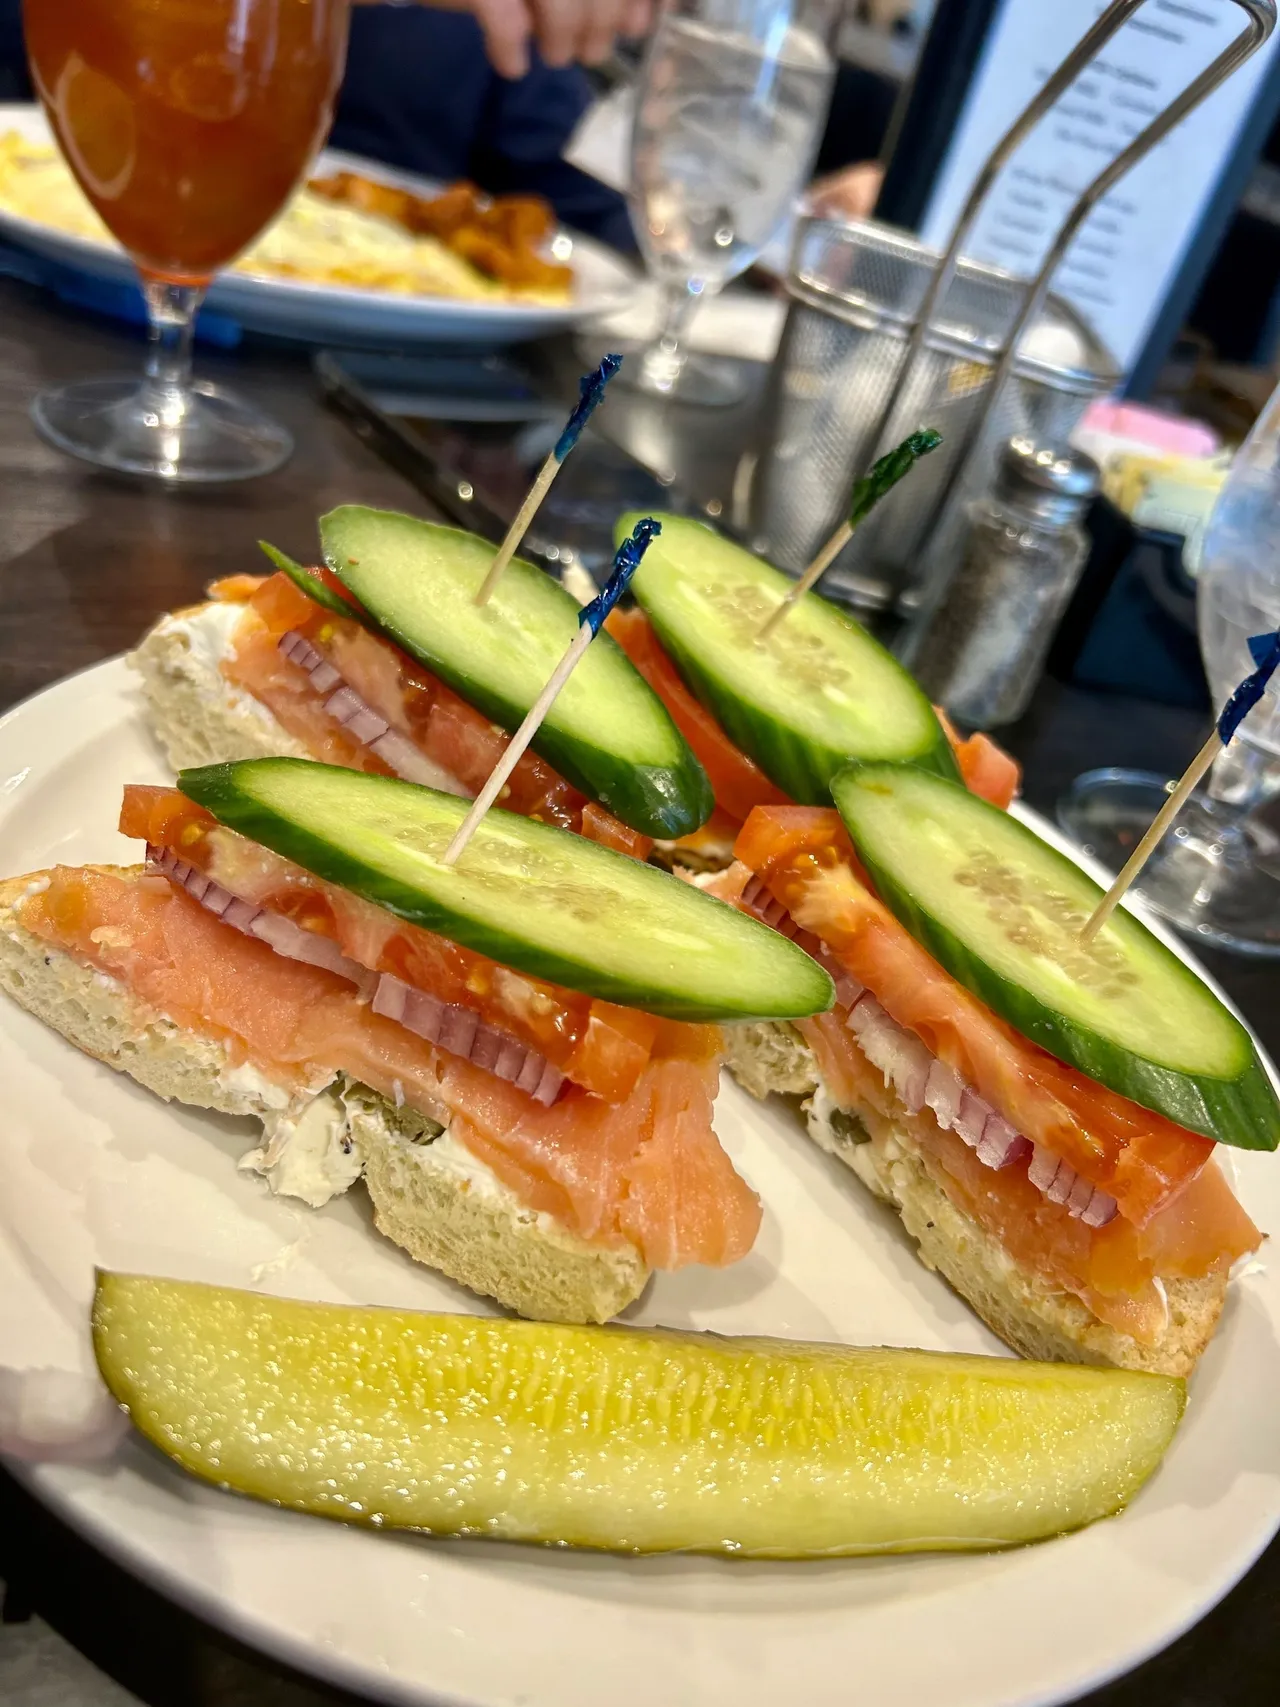 Lox Bagel with all the toppings from NY Bagels and Bialys.